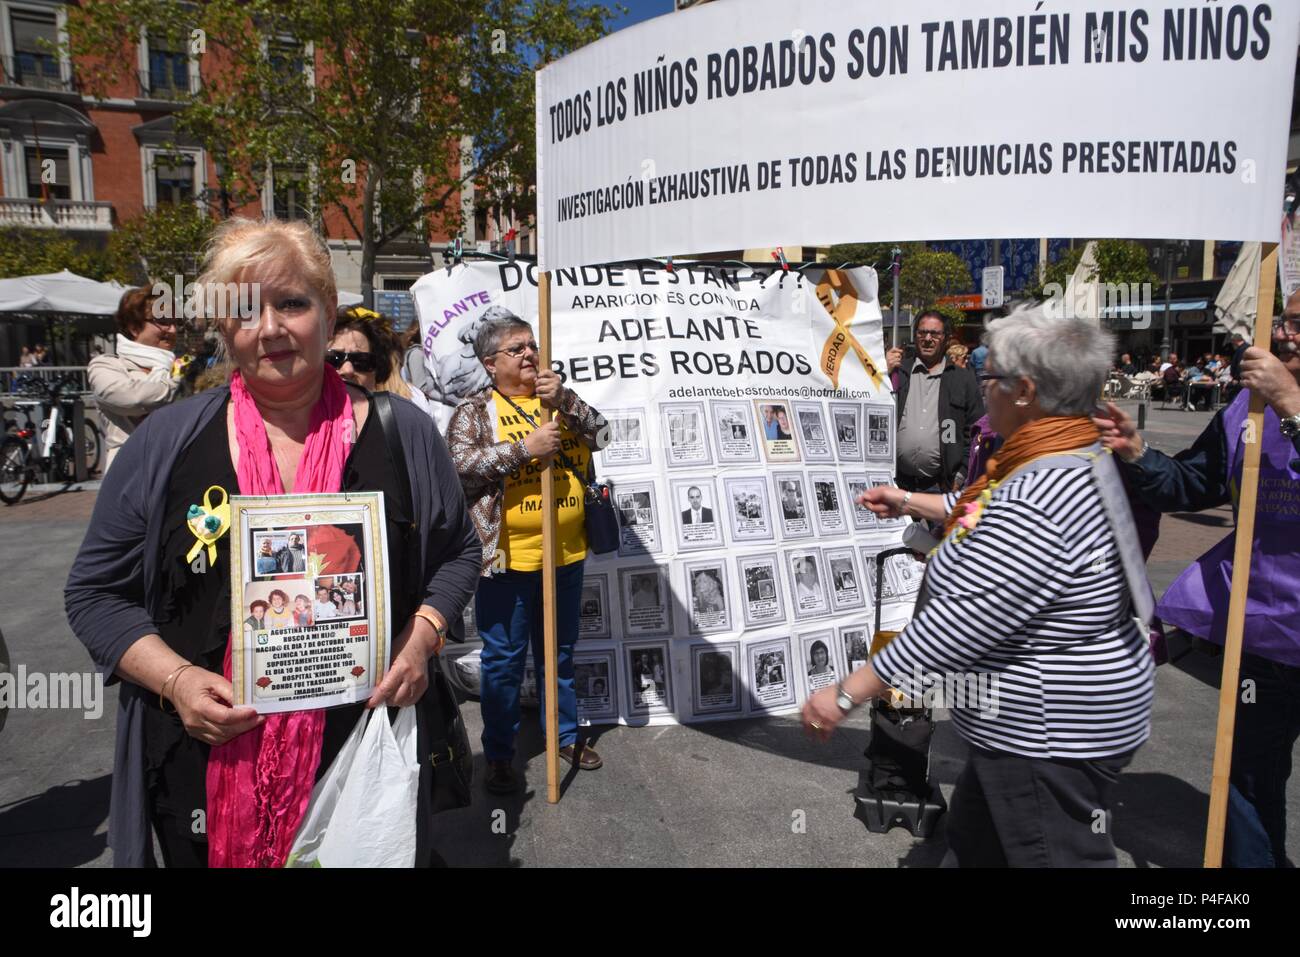 May 1, 2016 - Madrid, Spain: Victims of a baby-stealing policy hold a demonstration in central Madrid to ask Spanish authorities to fully investigate the alleged theft of thousands of newborns. The scandal of the 'bebes robados' ('stolen babies') date back from the era of Spanish dictator Francisco Franco, during which the newborns of some communist opponents of the regime or unmarried couples were declared stillborn, removed from their mothers and adopted by supporters of the regime. Similar thefts and illegal adoptions continued until the 1980s and 1990s and it's now estimated that as many a Stock Photo